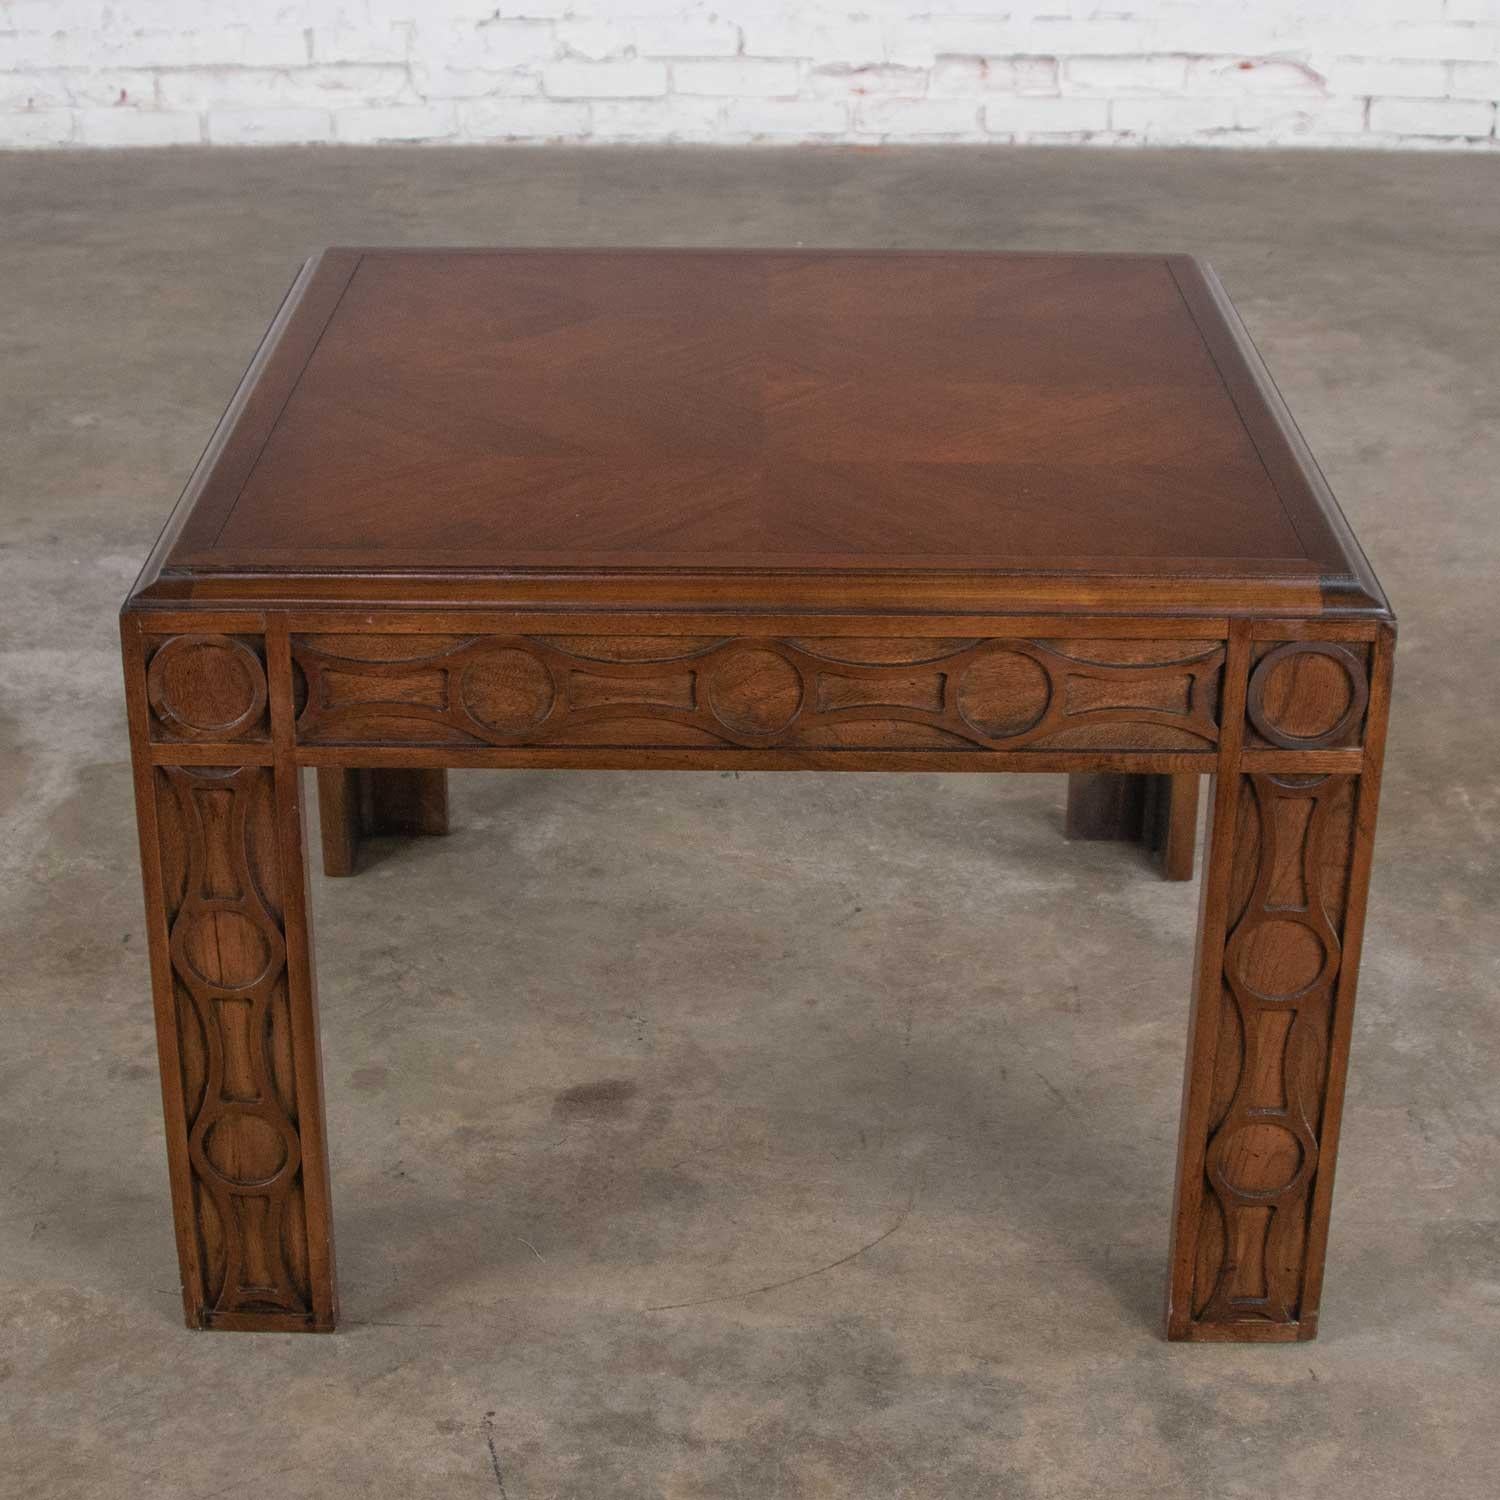 Handsome modern square Parsons style end table or side table by Lane with a carved circular leg design and chevron veneer top. It is in wonderful vintage condition. There are age appropriate signs of wear but nothing outstanding apart from a chip to